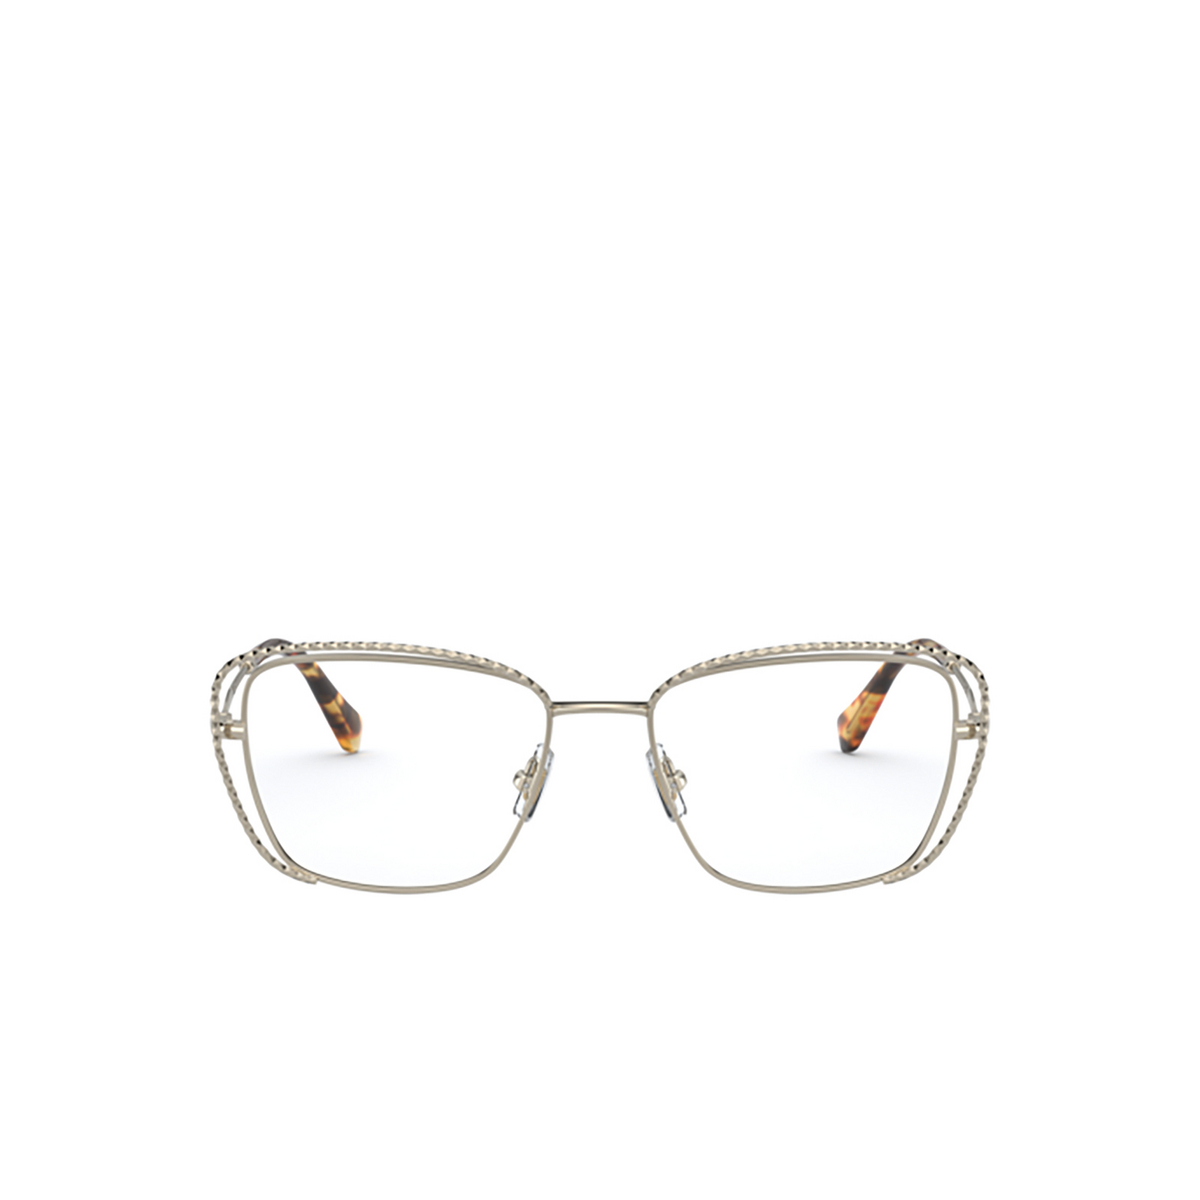 Miu Miu CORE COLLECTION Eyeglasses ZVN1O1 Pale Gold - front view